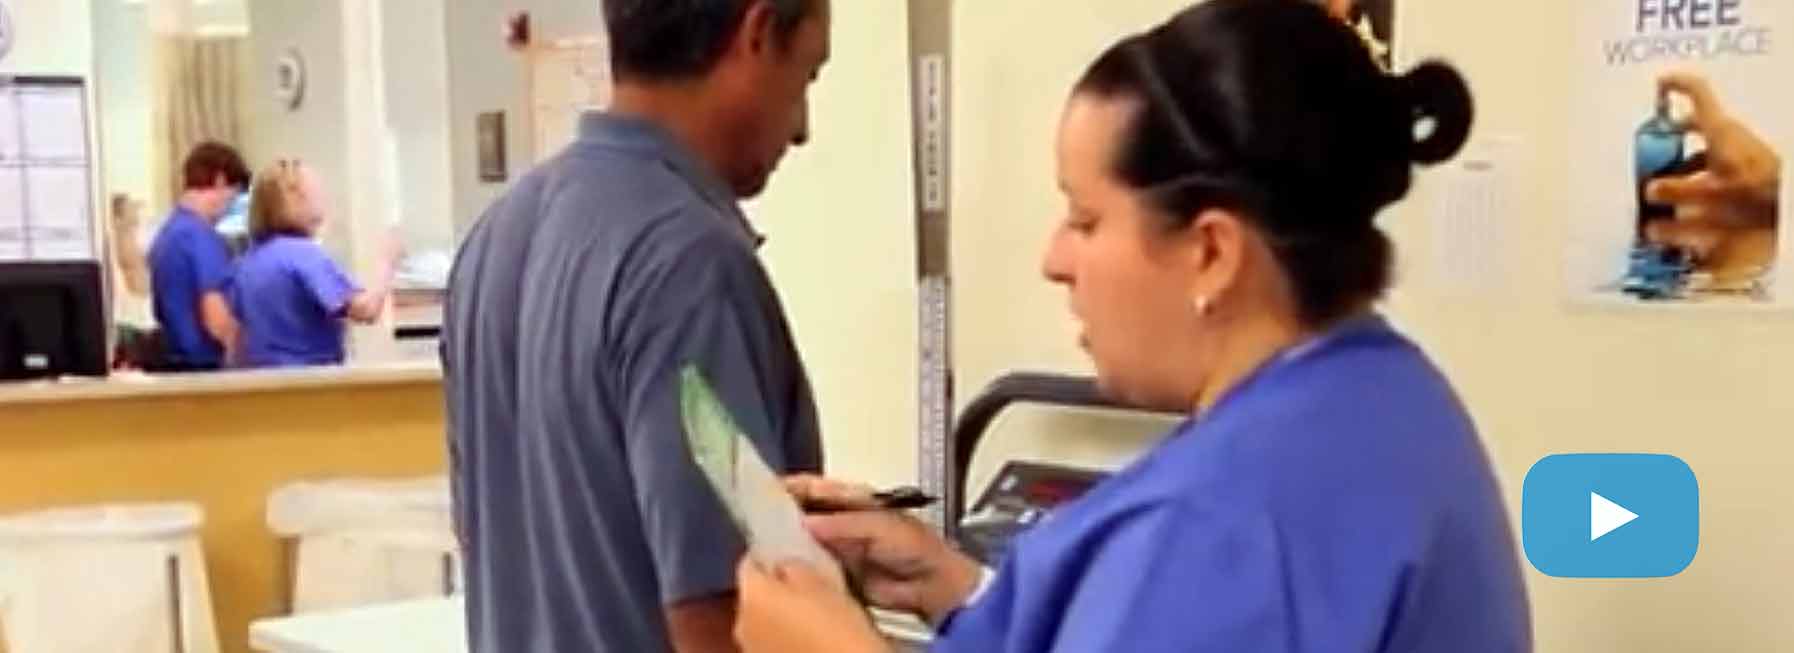 Nurse in a clinic with FIT test instructions.